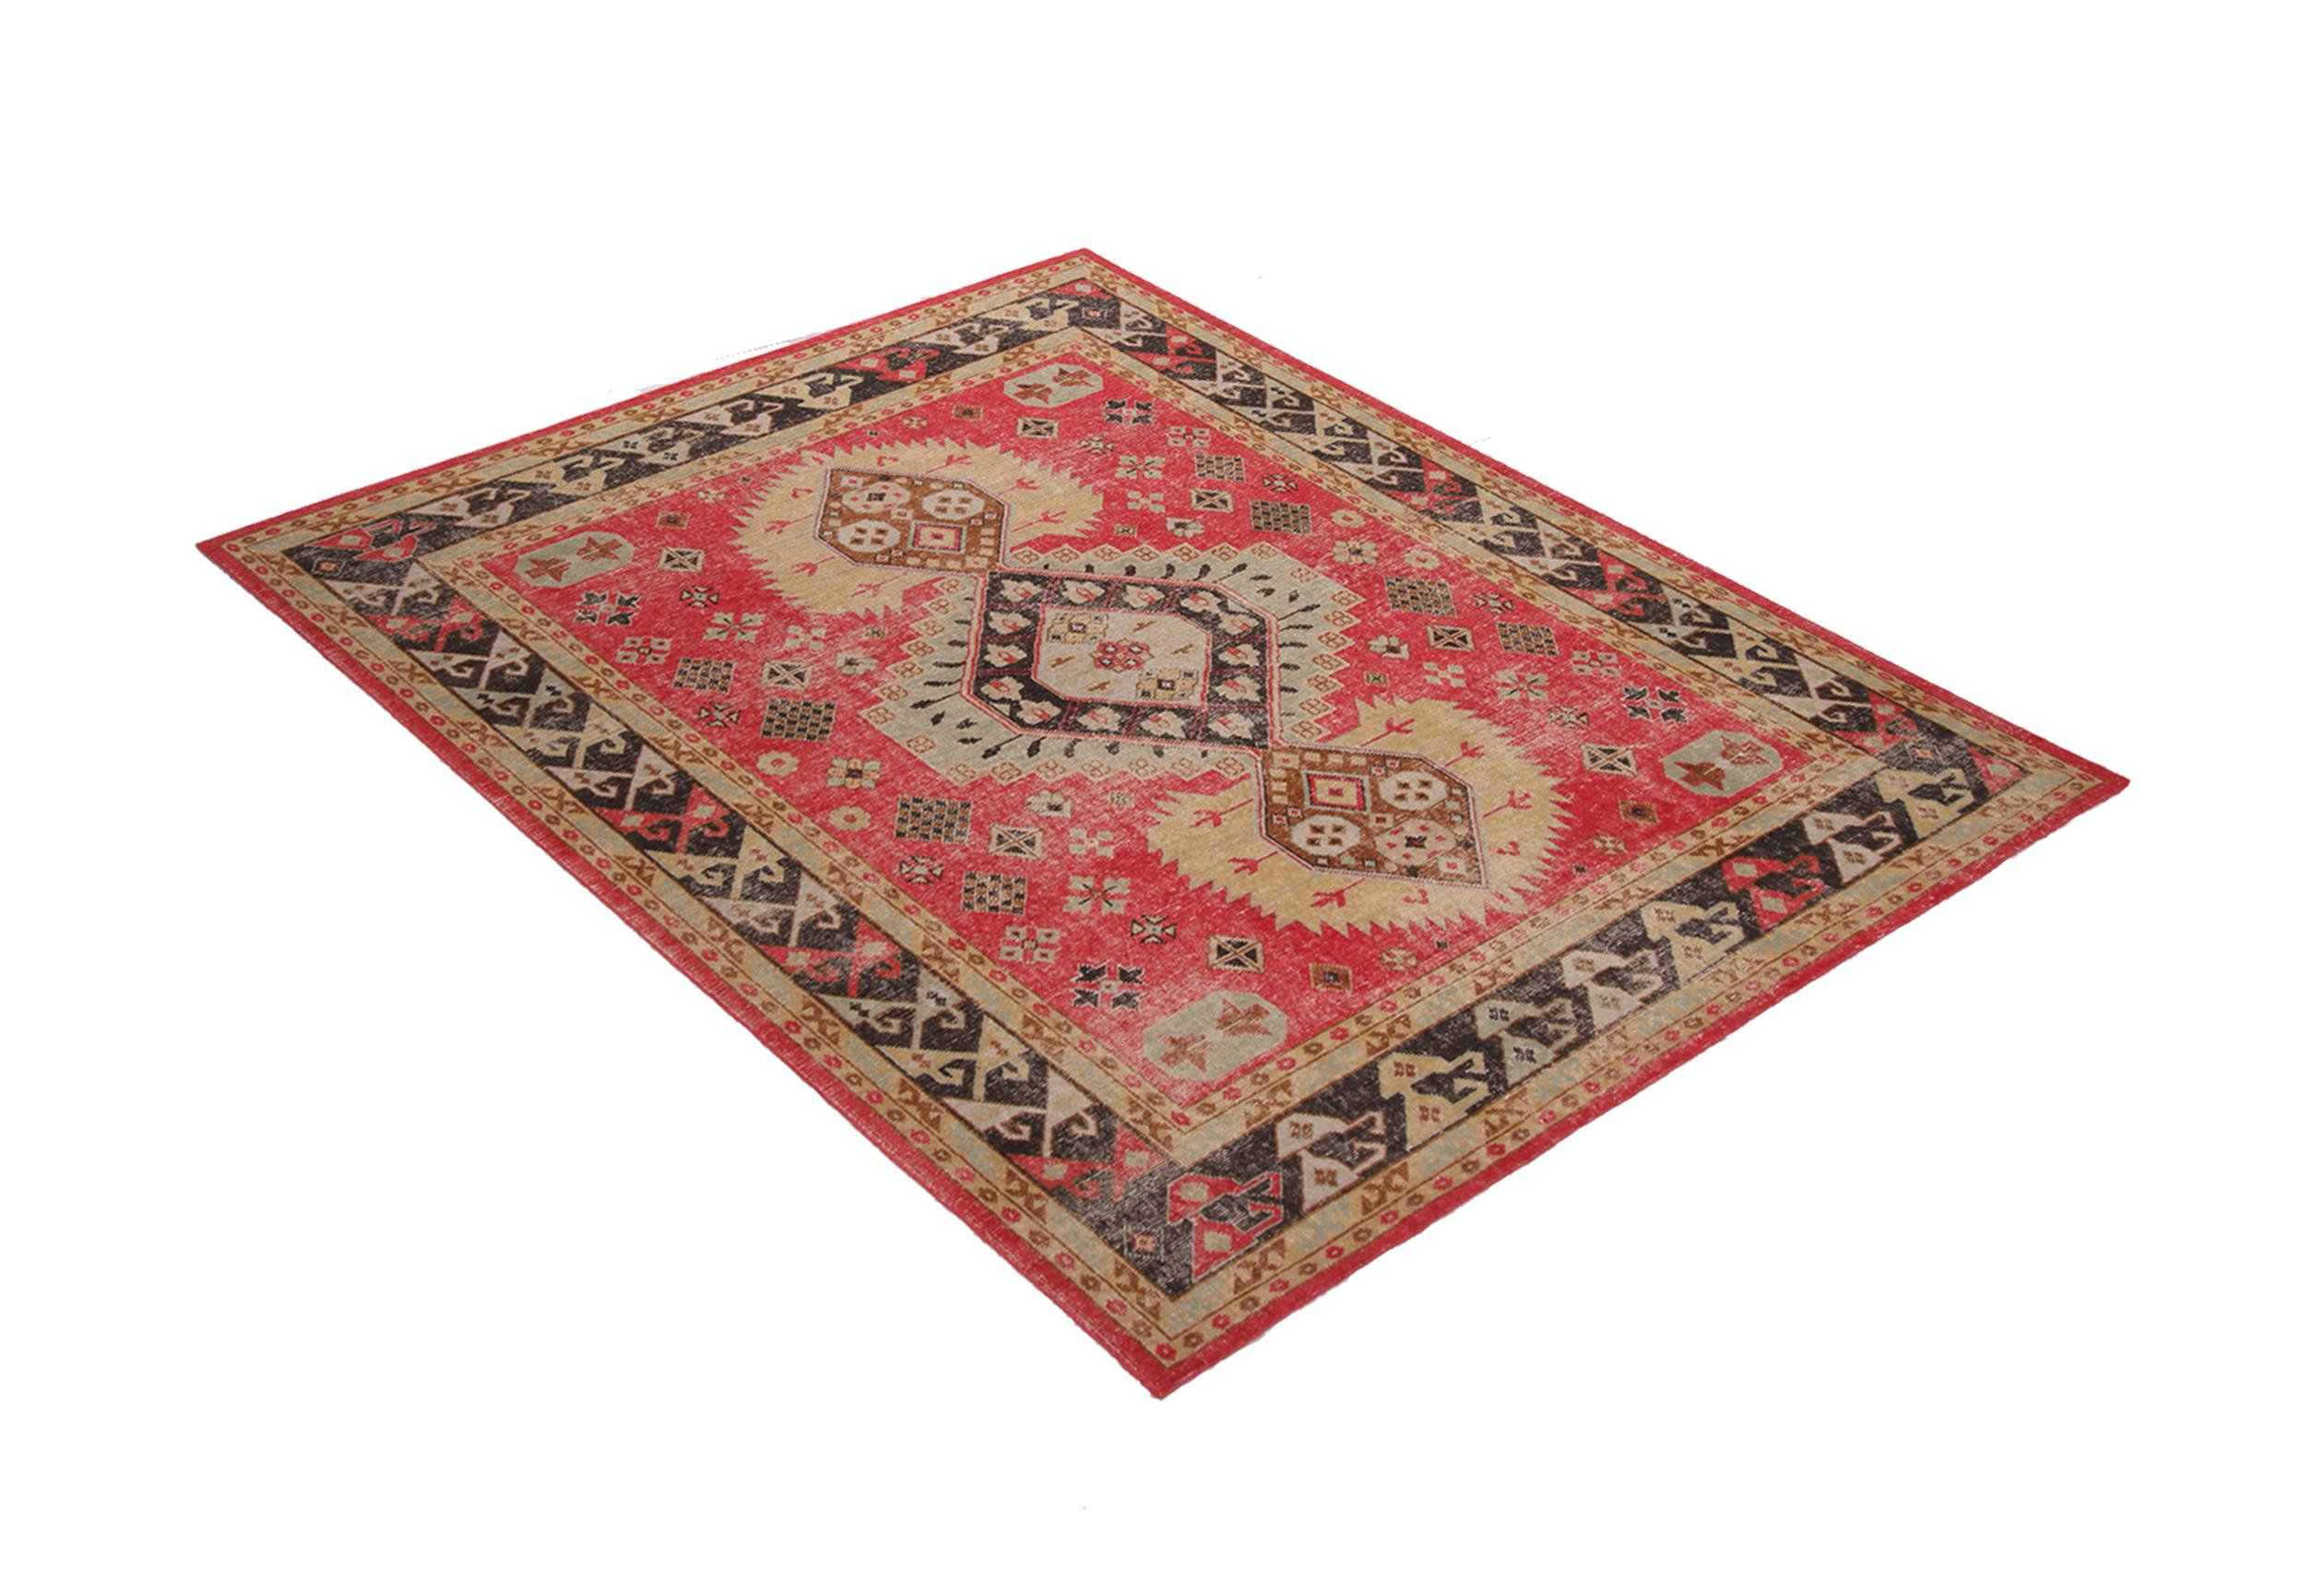 This contemporary hand knotted wool rug hails from Rug & Kilim’s Homage Collection and enjoys a finer take on distressed shabby chic aesthetic with fewer knots per square inch. The fiery red background plays off the bright gold accents of the